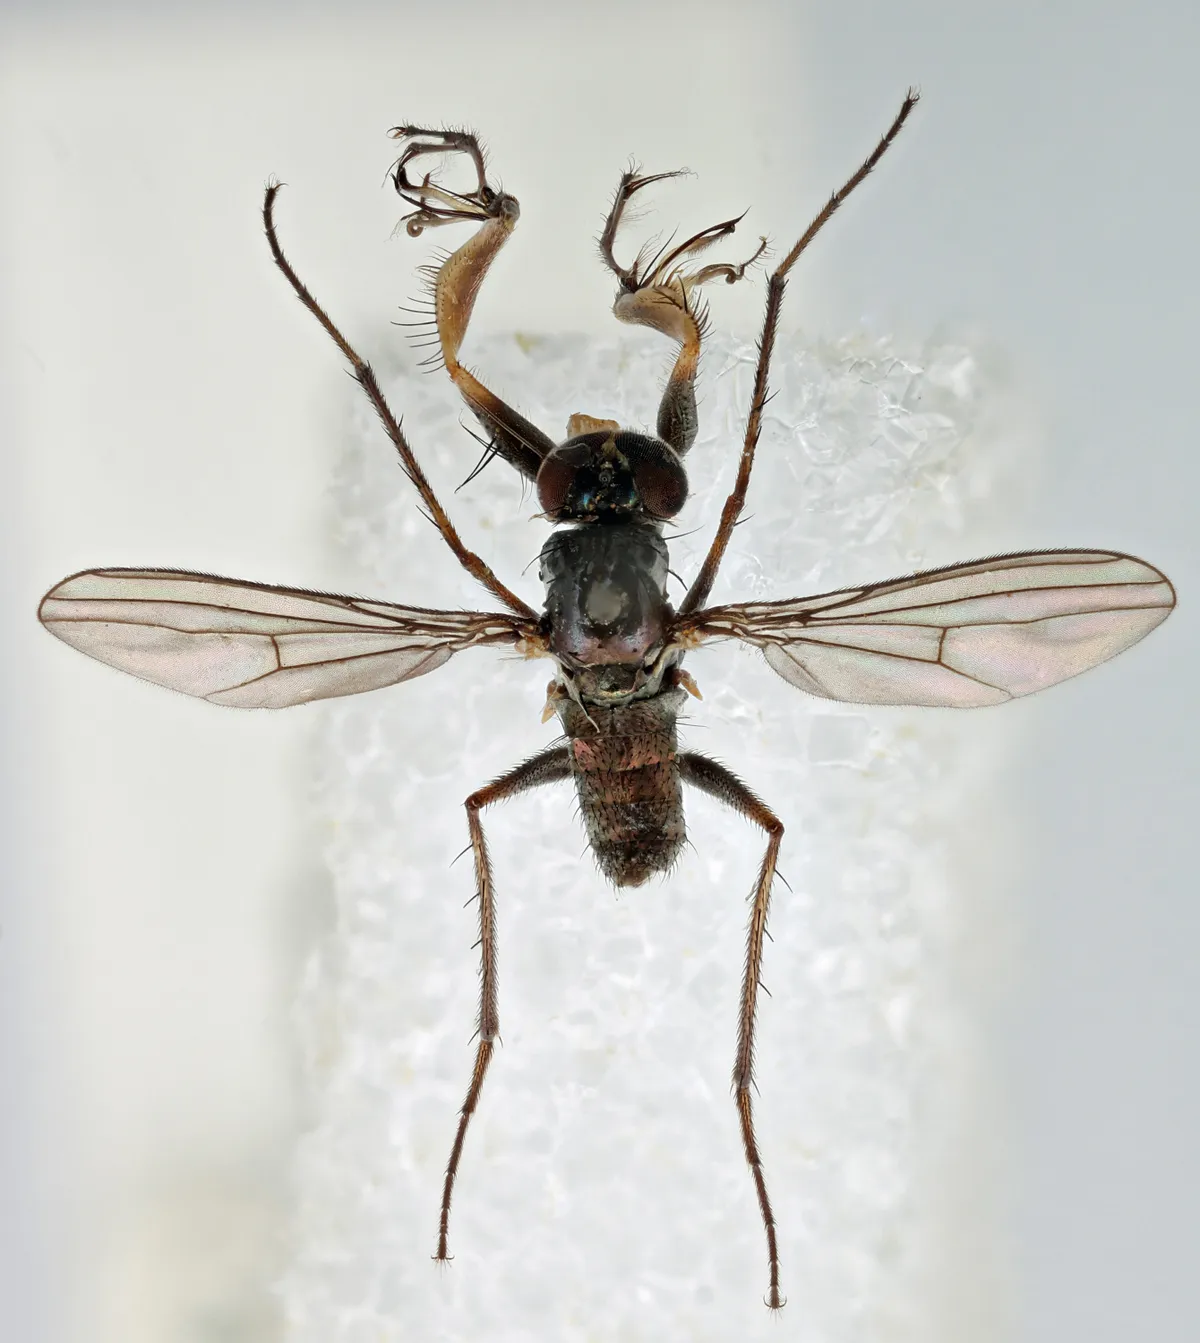 Campsicnemus magius (image taken by Dawn painter of an NHM specimen)